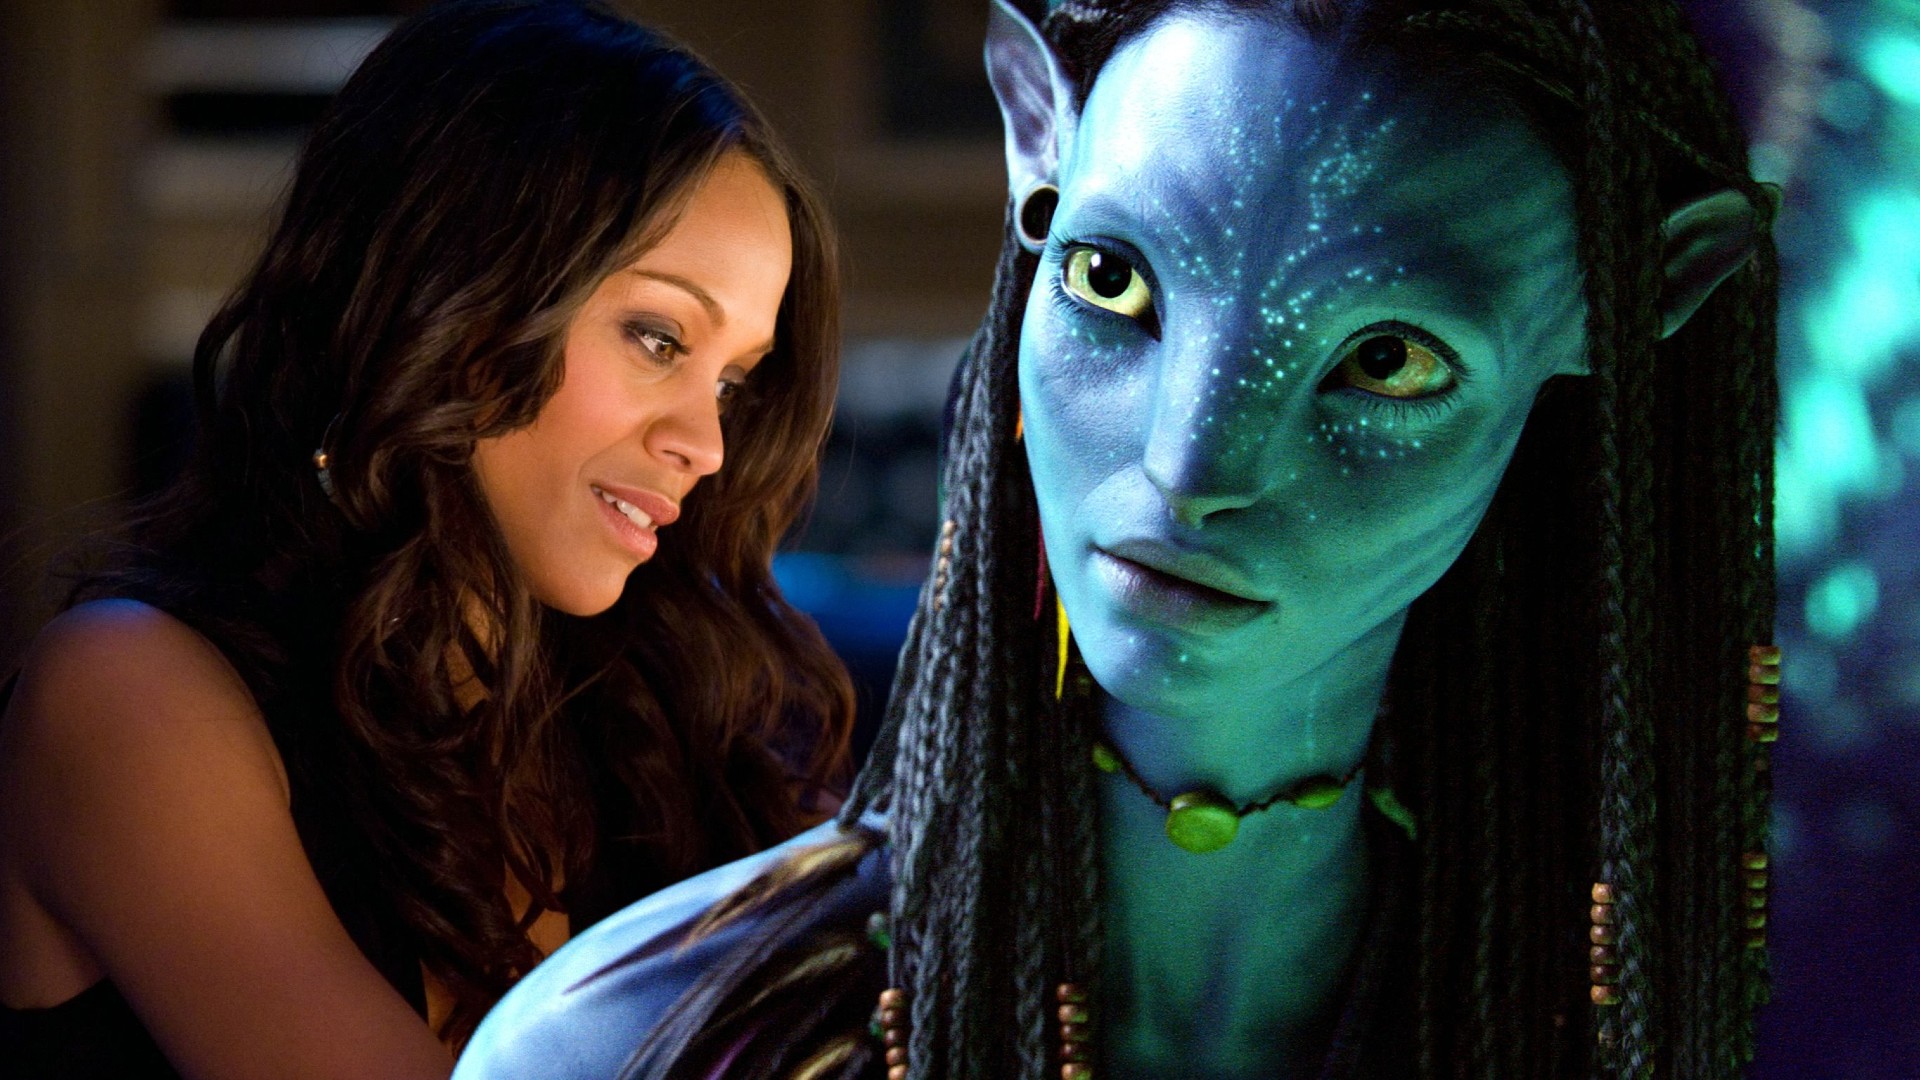 Zoe Saldana Already Wrapped Up Filming Avatar Sequels 2  3  Film News   CONVERSATIONS ABOUT HER